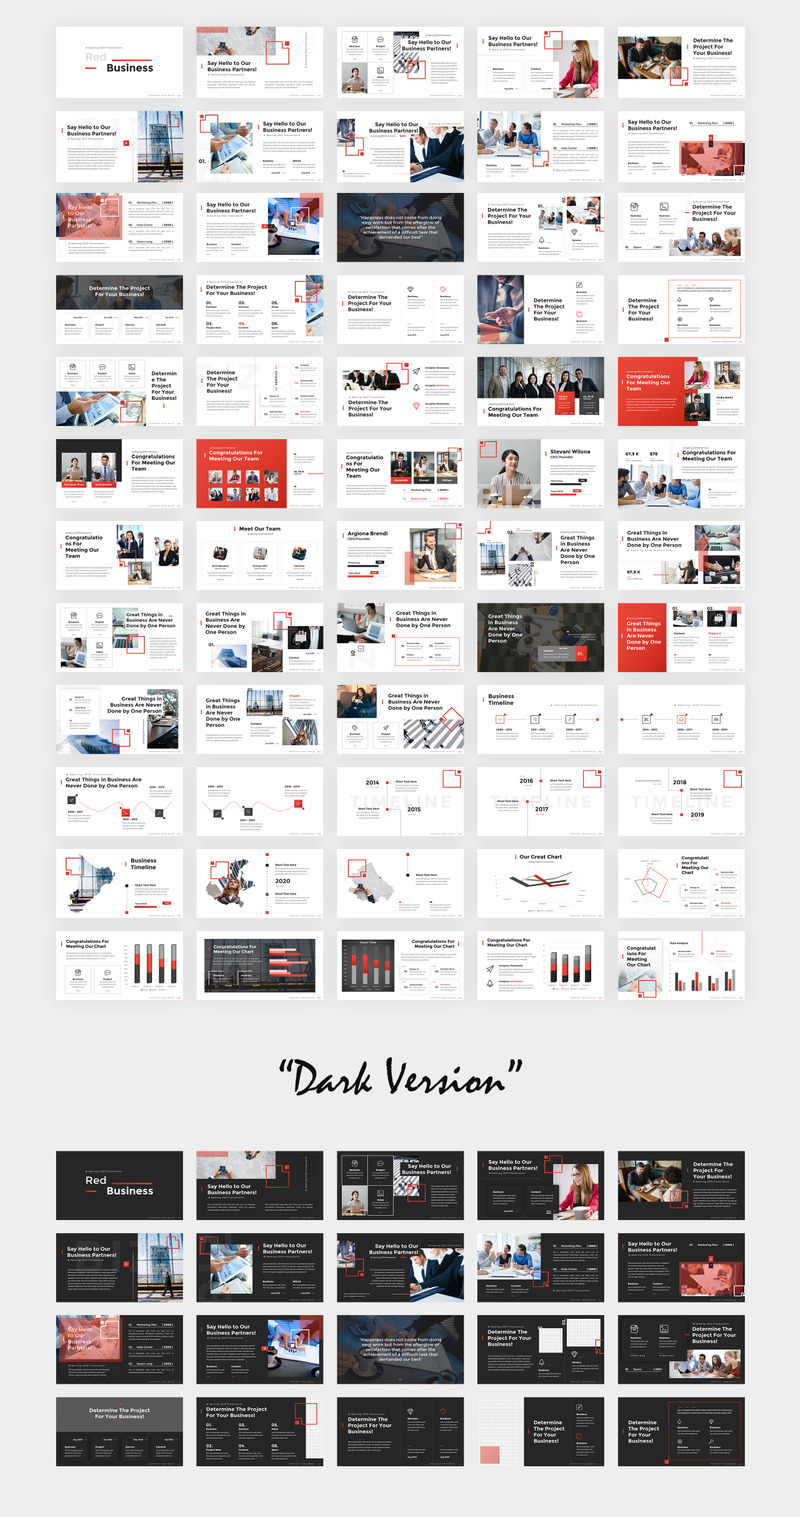 Red Business 2020 PowerPoint template - TemplateMonster